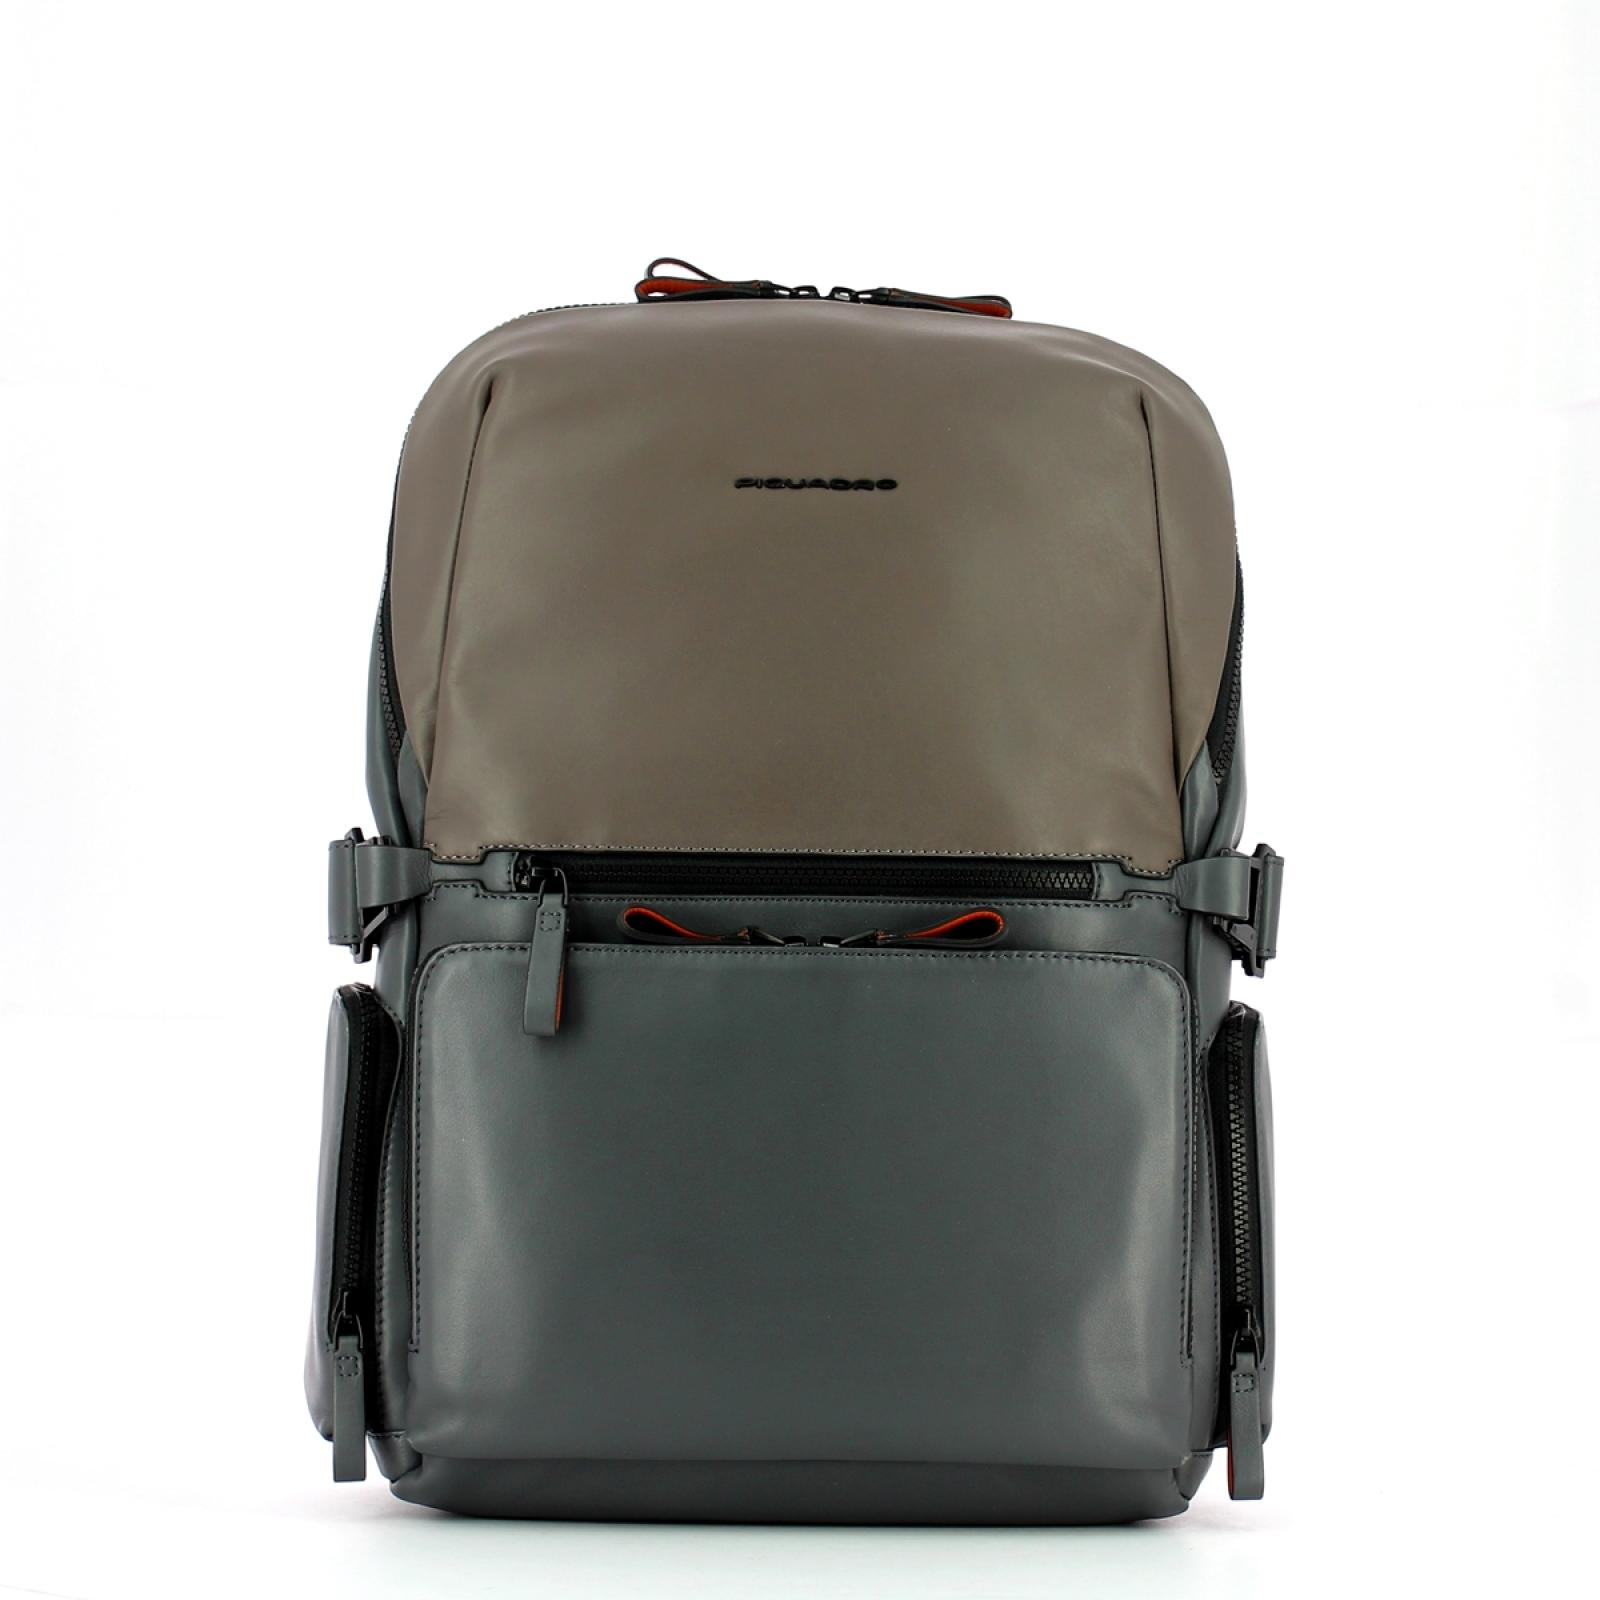 Piquadro Fast-check Laptop Backpack Line 15.6 - 1